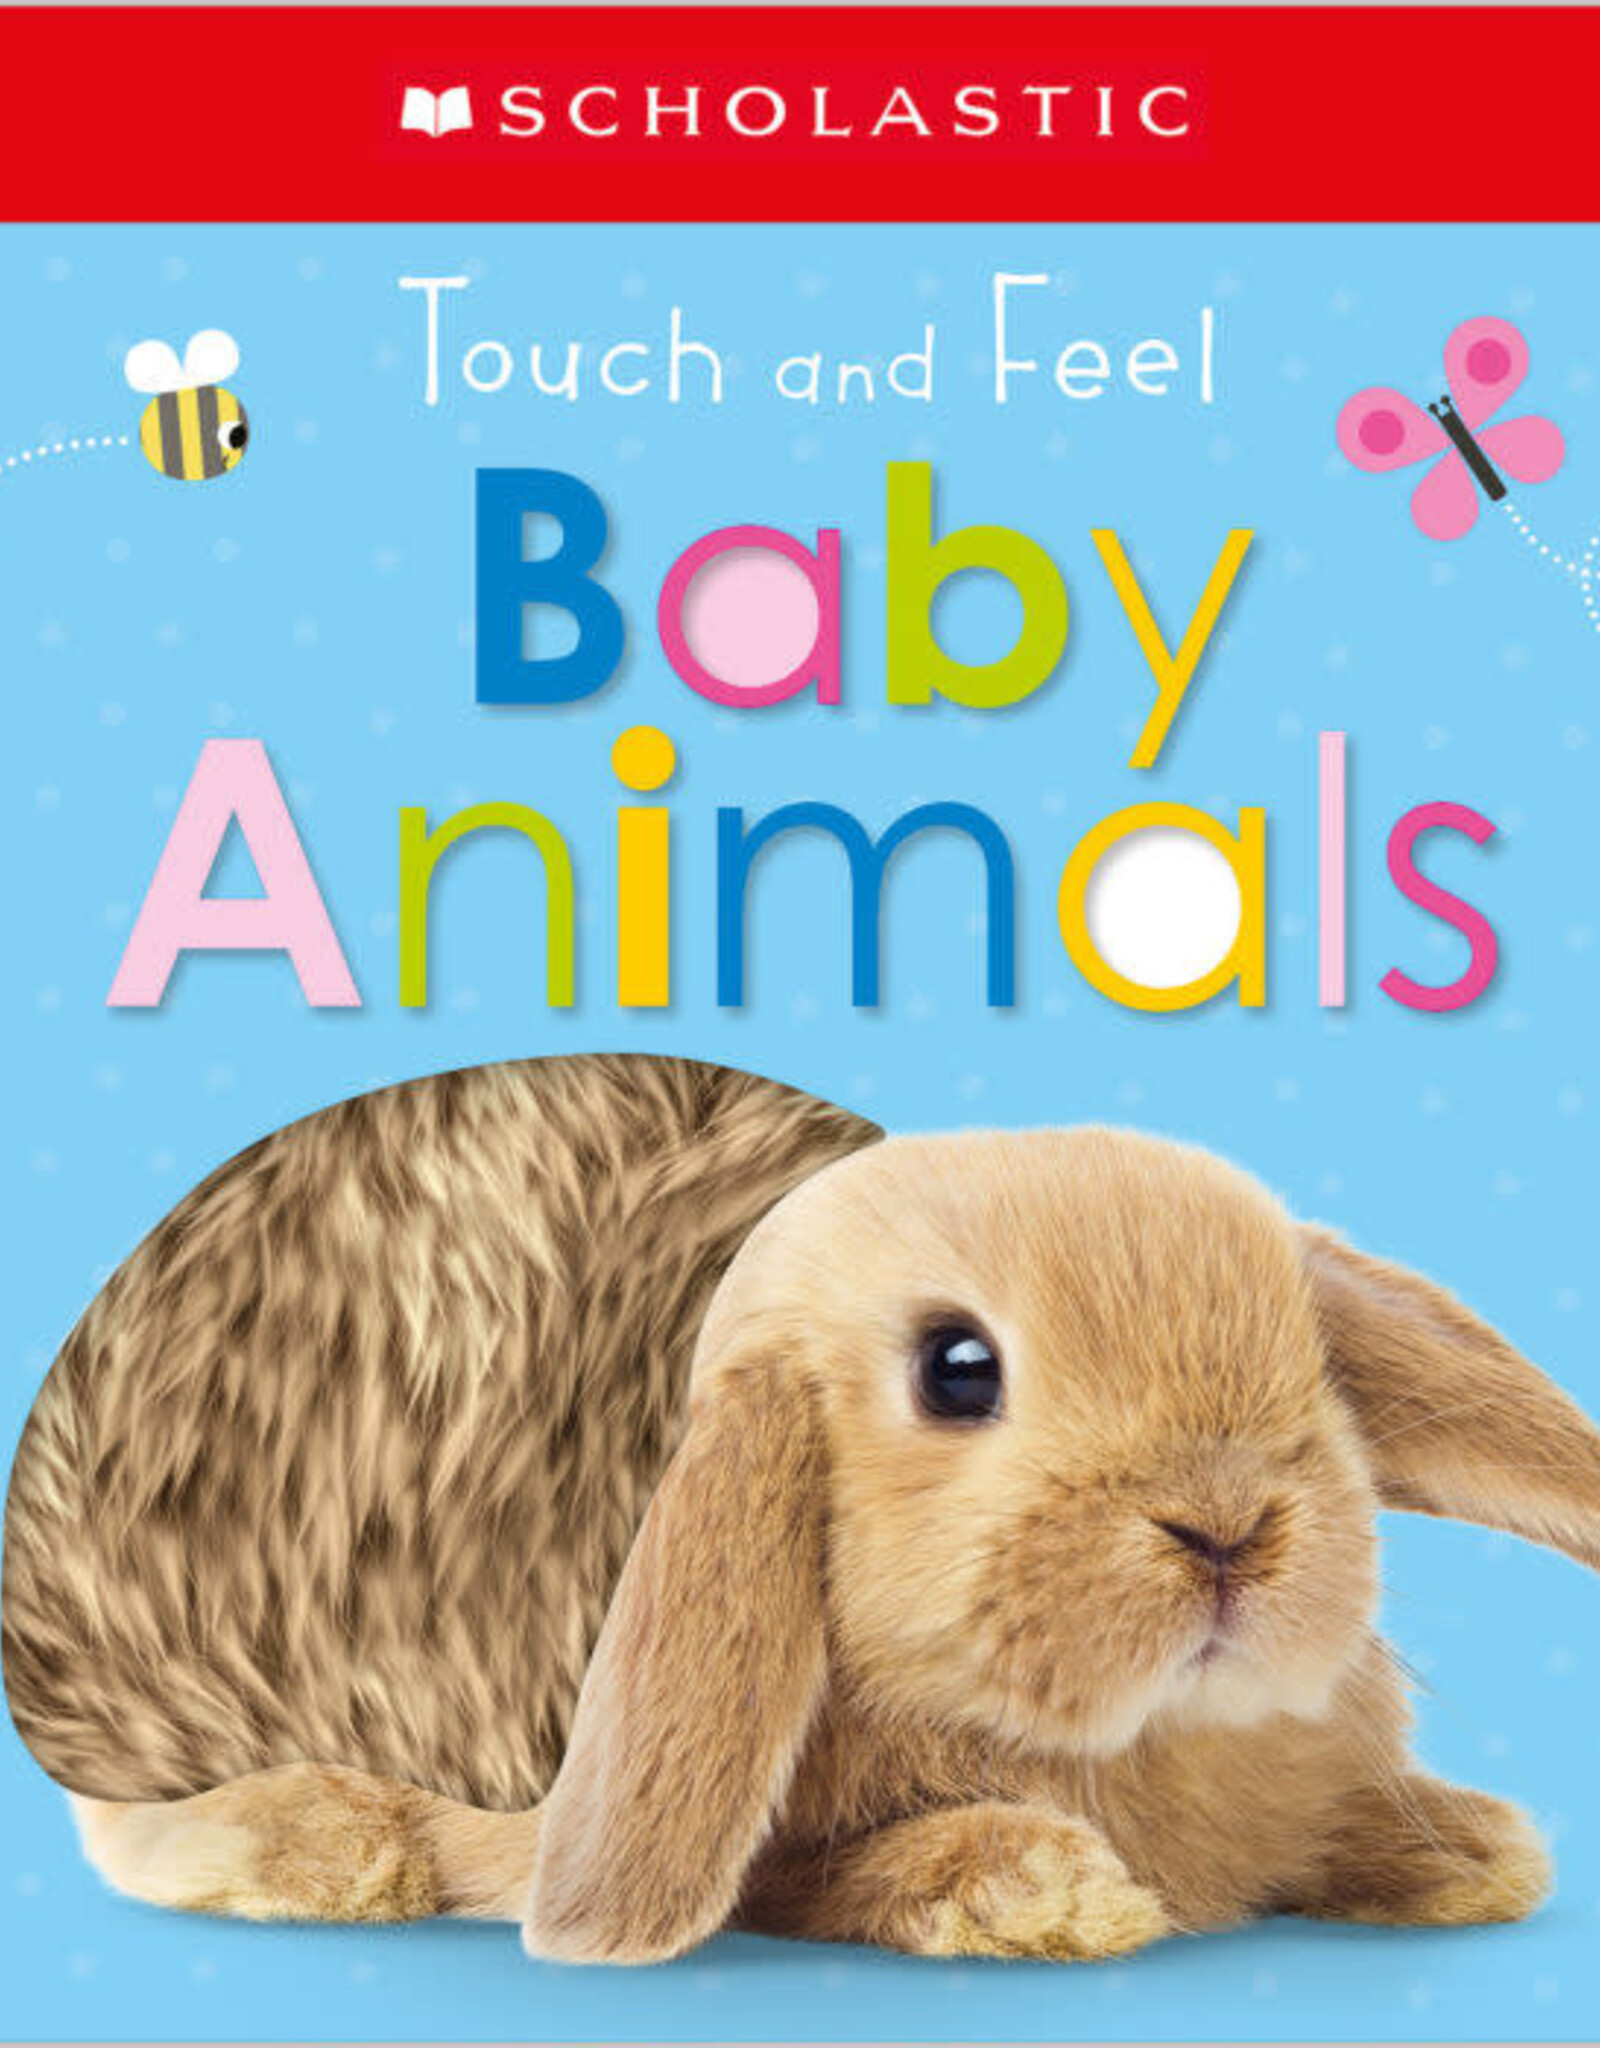 Scholastic Scholastic - Touch and Feel Baby Animals